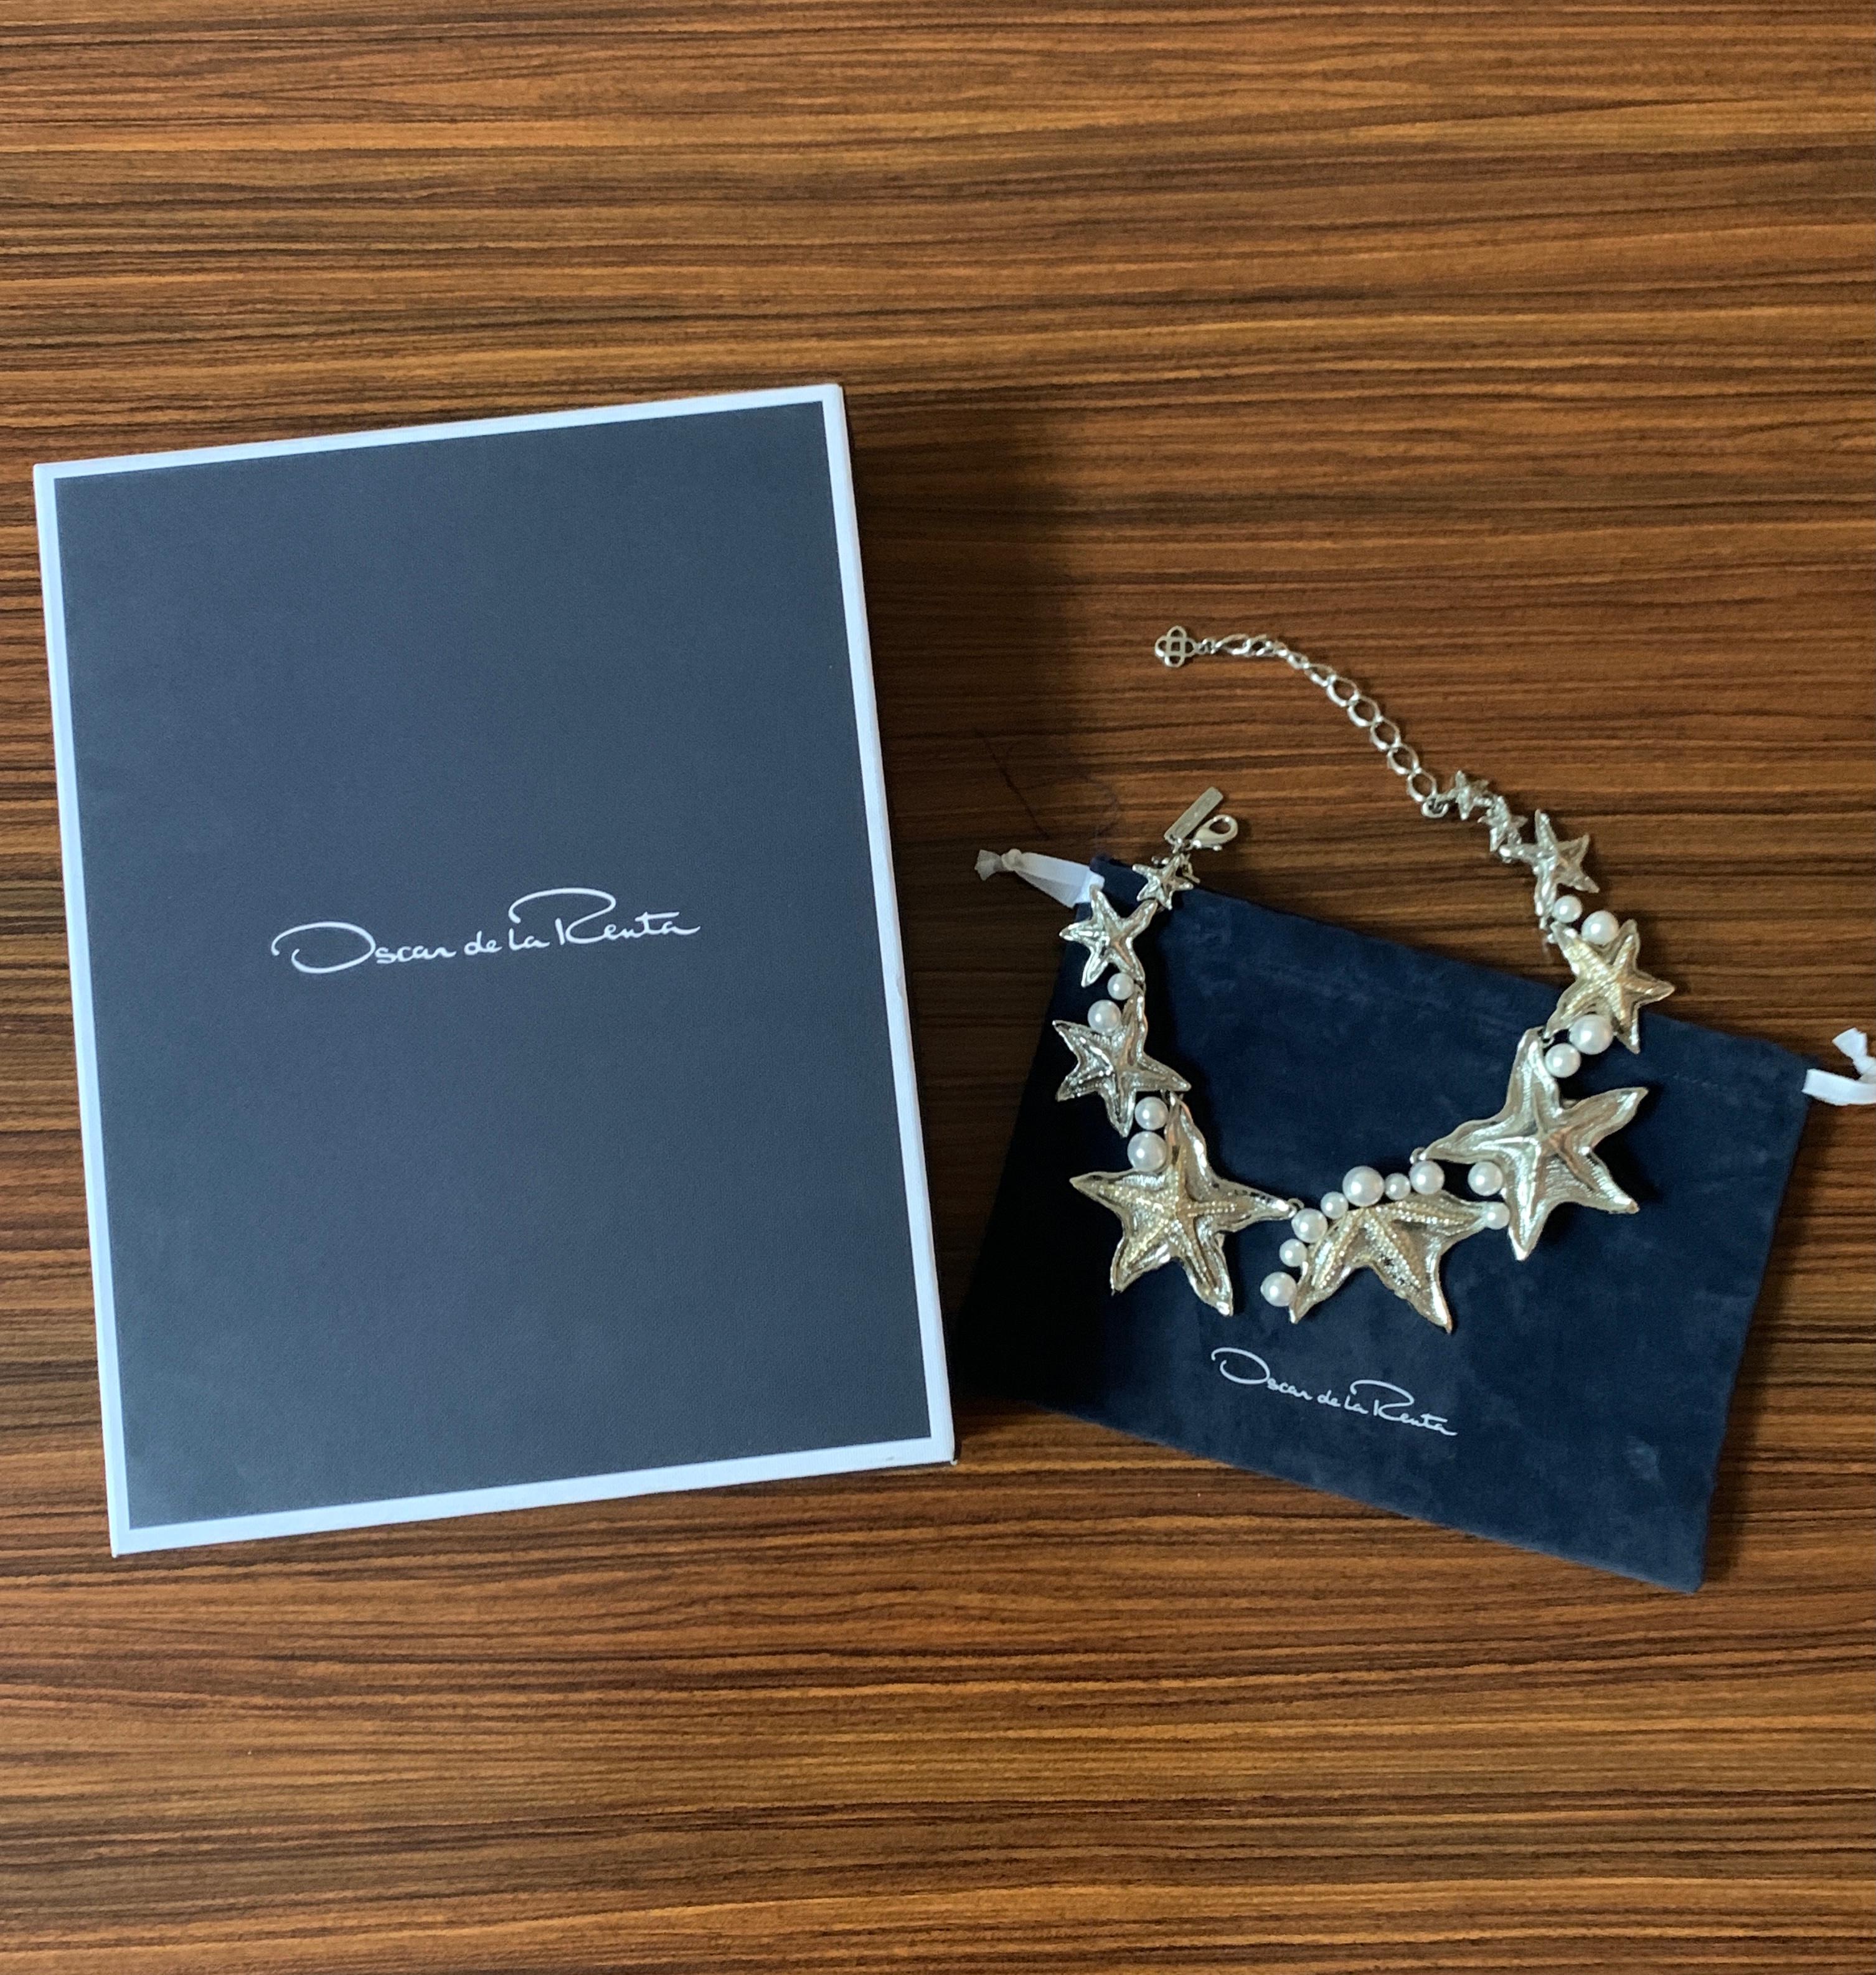 Oscar de la Renta Starfish Necklace in Silver and Gold Tone with Faux Pearls For Sale 1